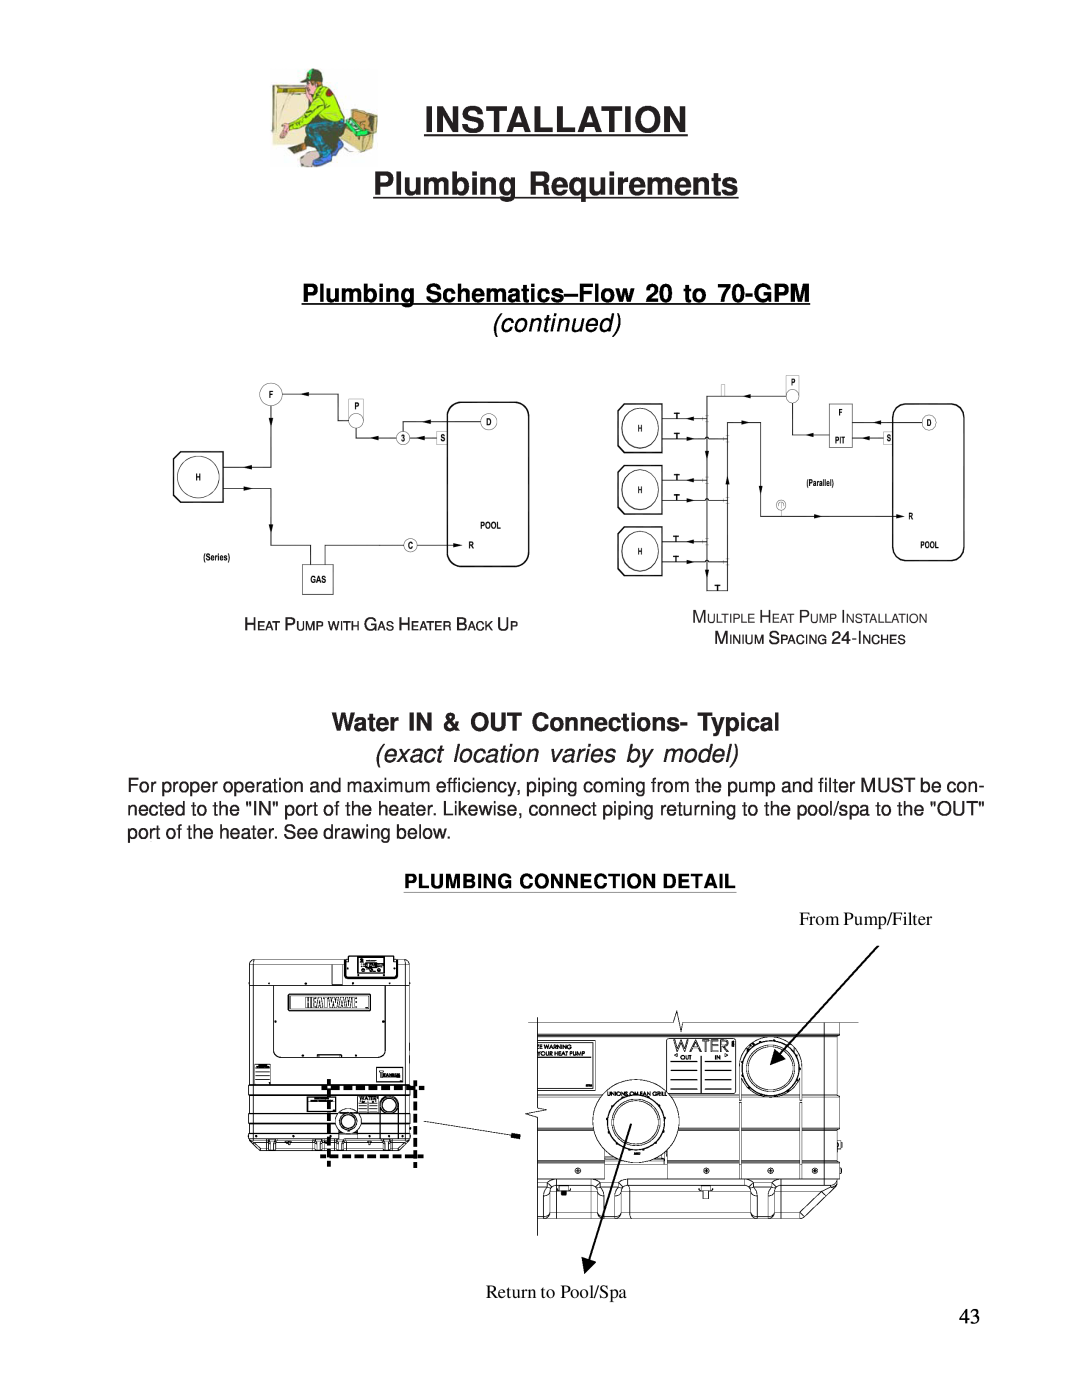 Aquacal 120 Plumbing Schematics–Flow20 to 70-GPM, Water IN & OUT Connections- Typical, Installation, Plumbing Requirements 